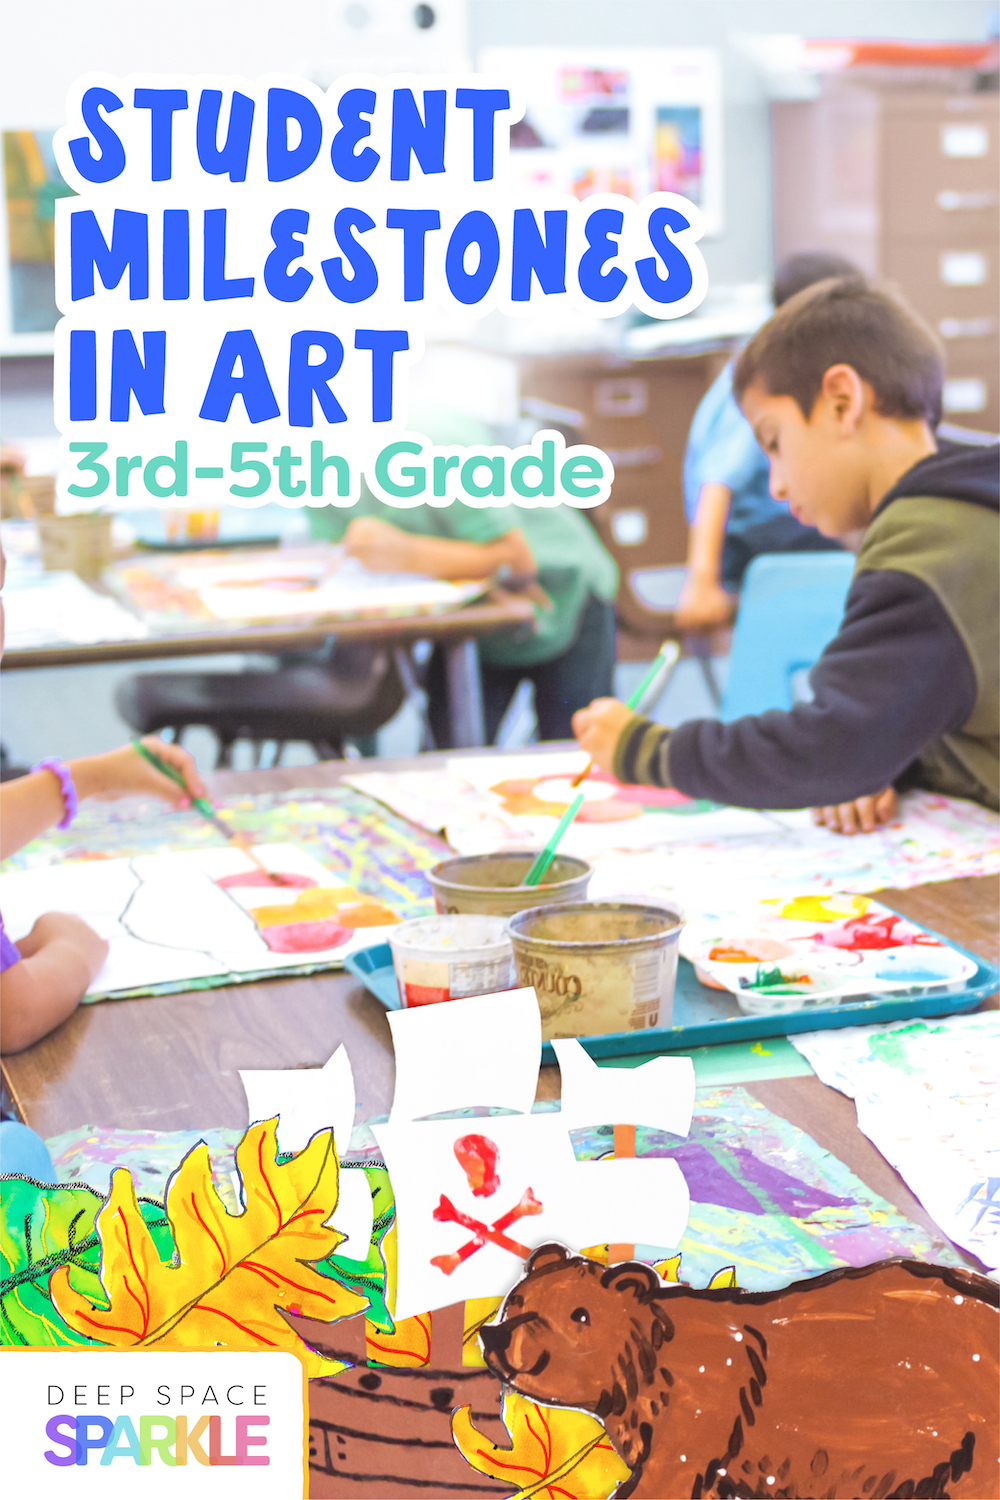 Student Milestones in art for 3rd, 4th and 5th grade students expectations in the art room.